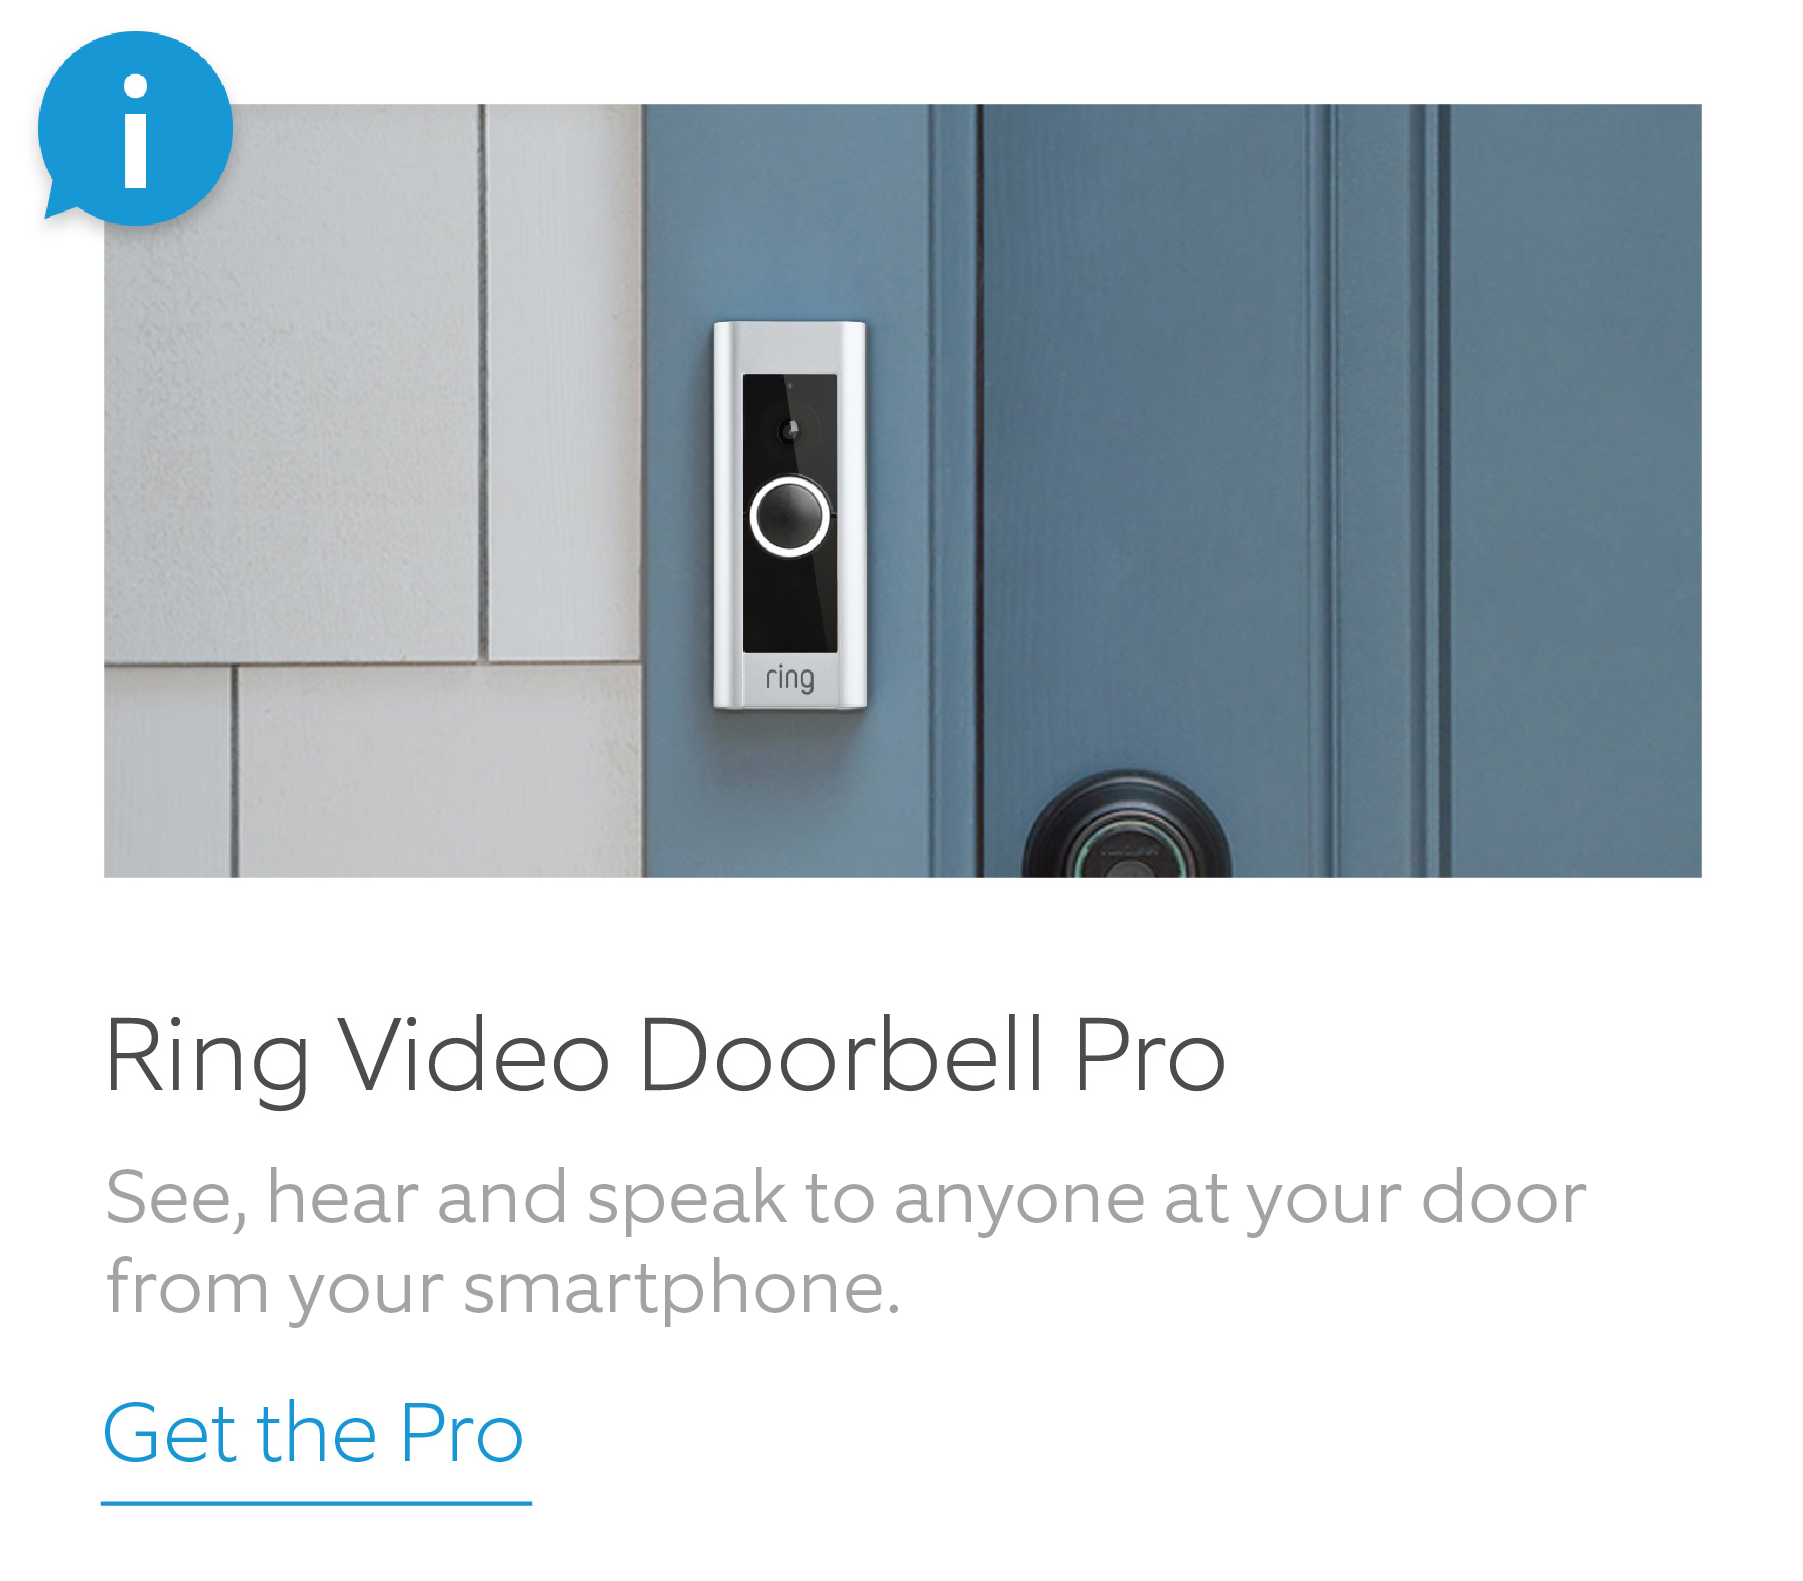 Protect your home with Ring Video Doorbell